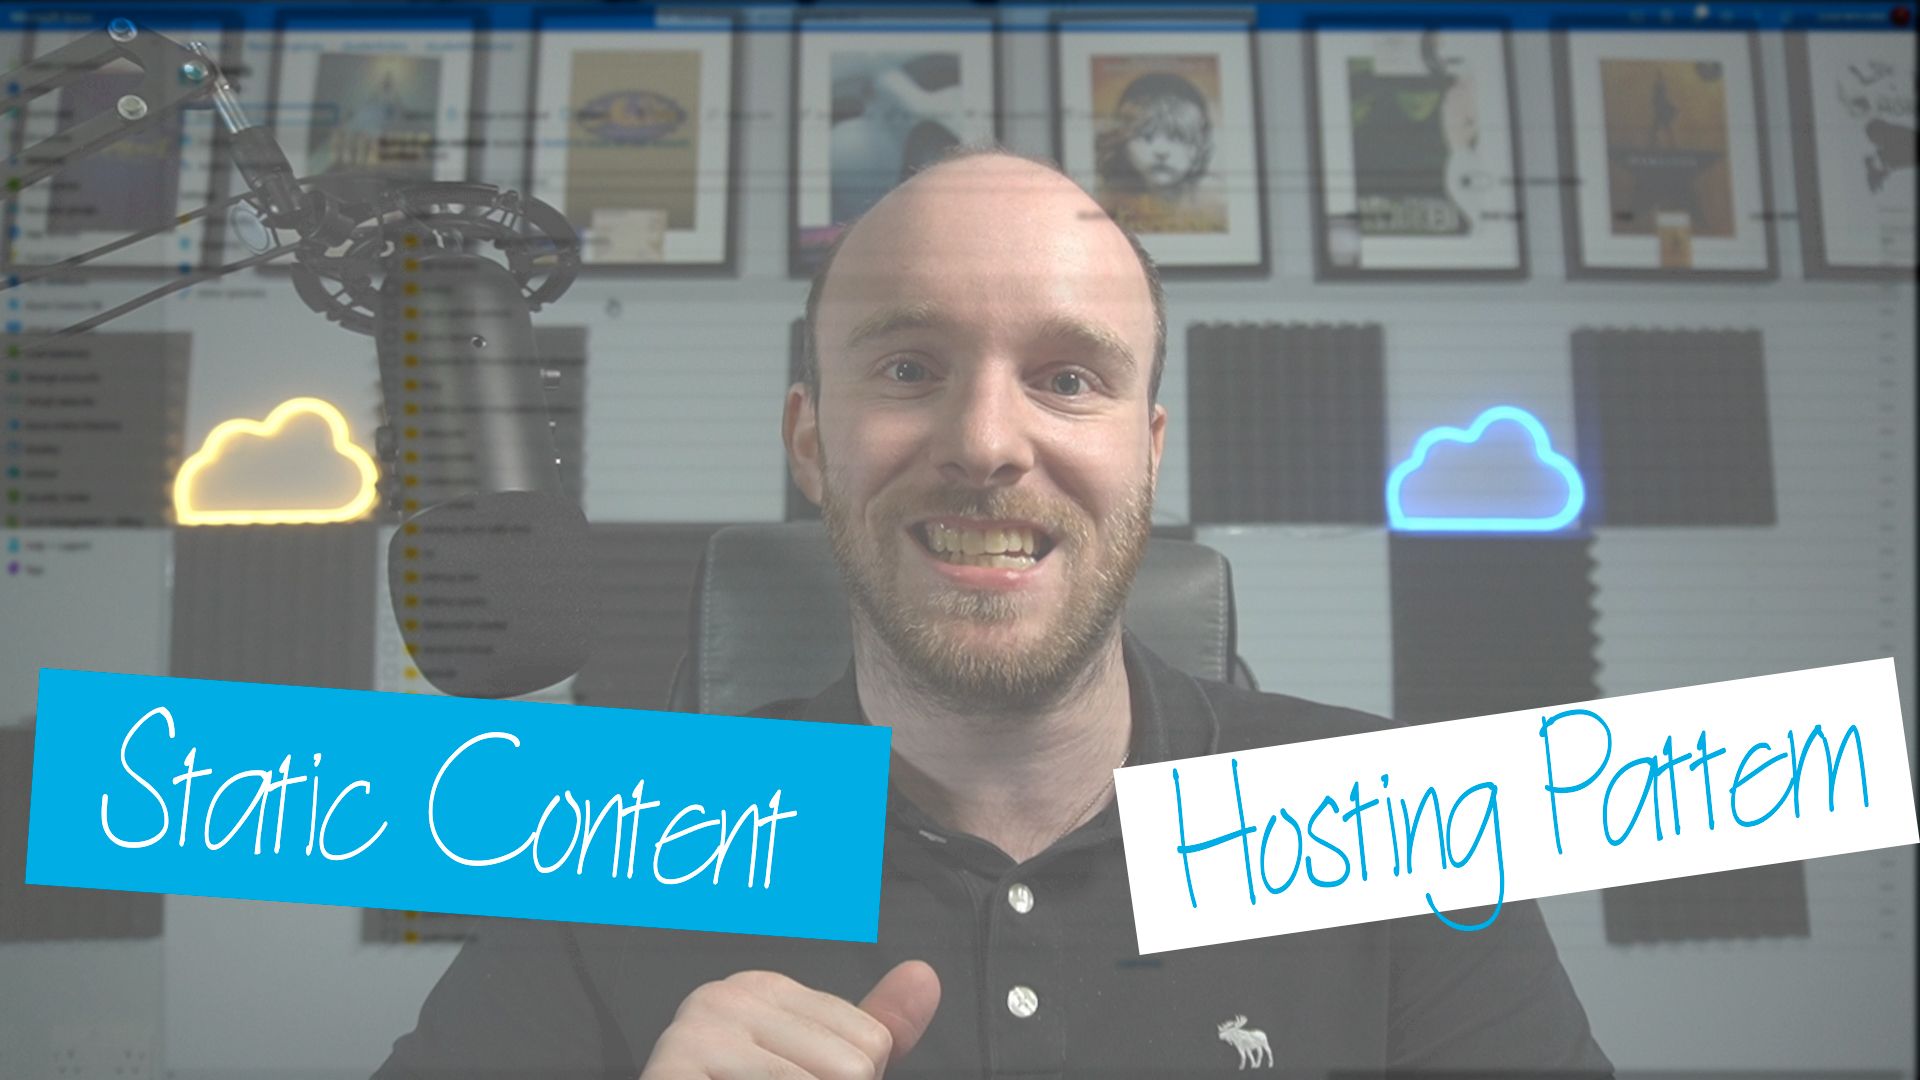 22 - Static Content Hosting Pattern (Save cost and gain performance for static websites!)